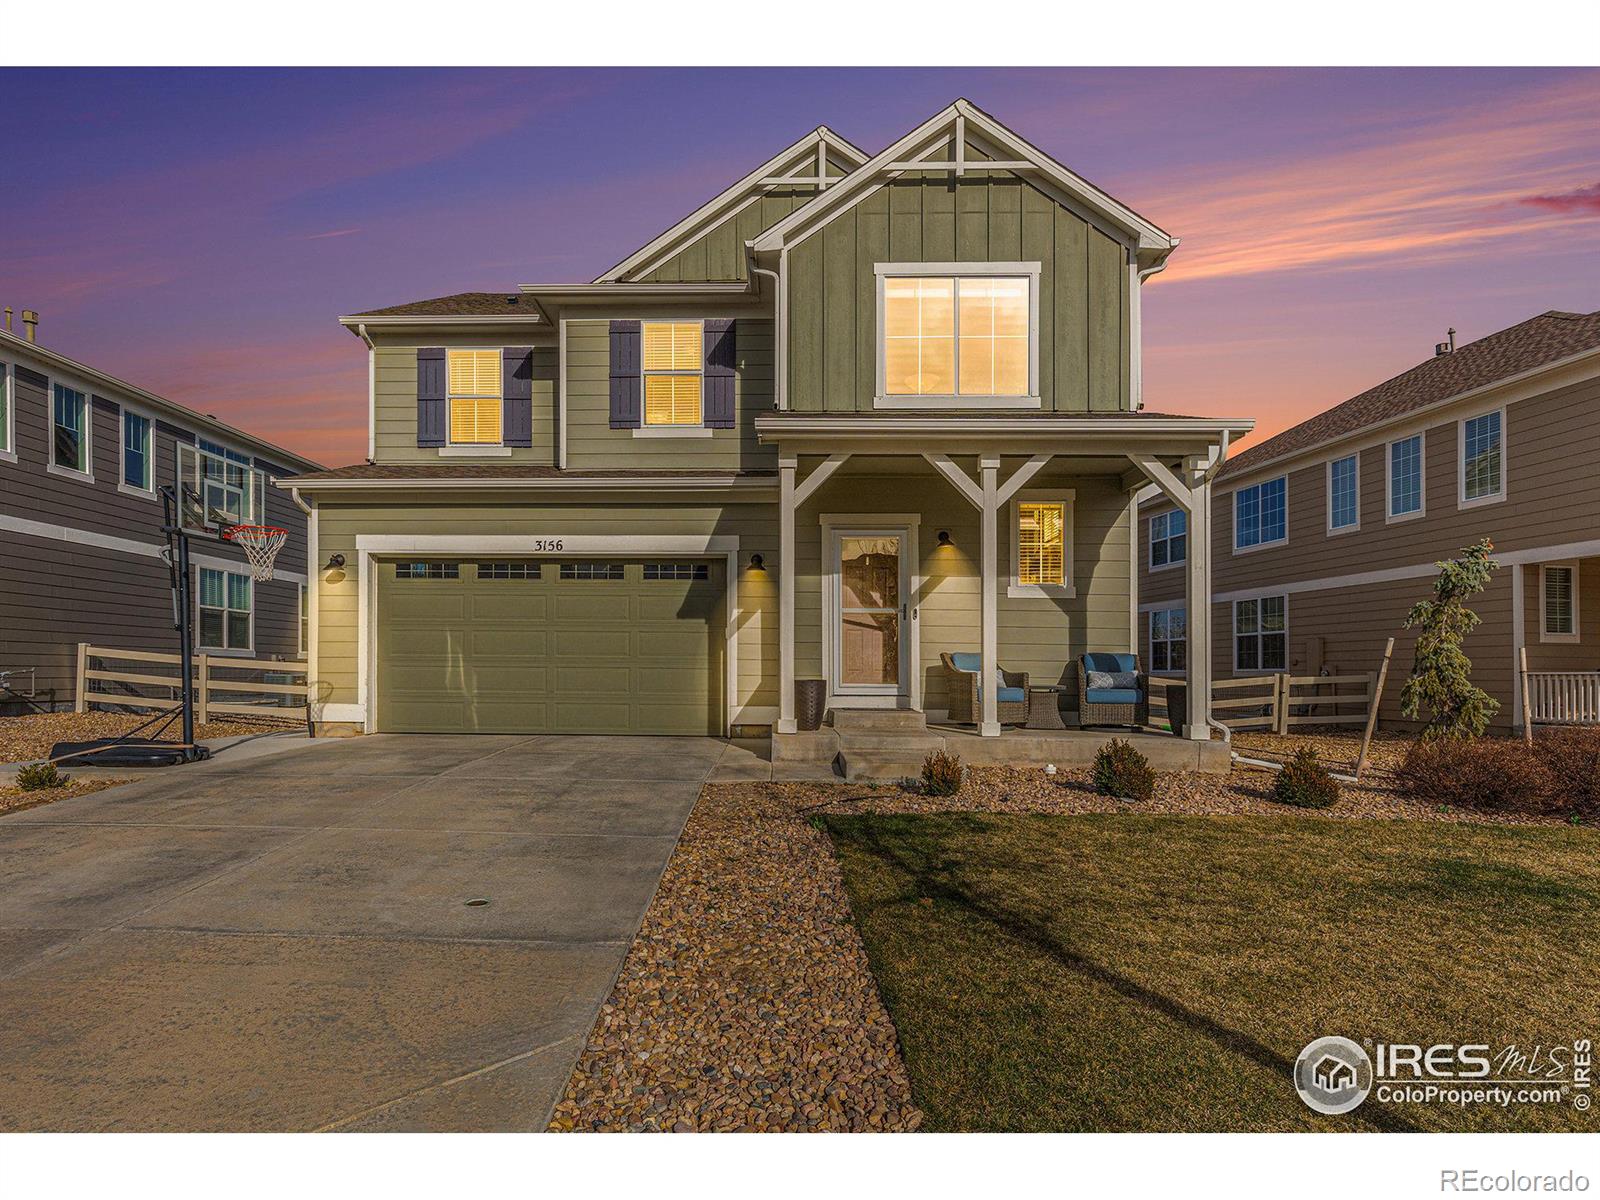 3156  Bryce Drive, fort collins MLS: 4567891005499 Beds: 4 Baths: 4 Price: $700,000